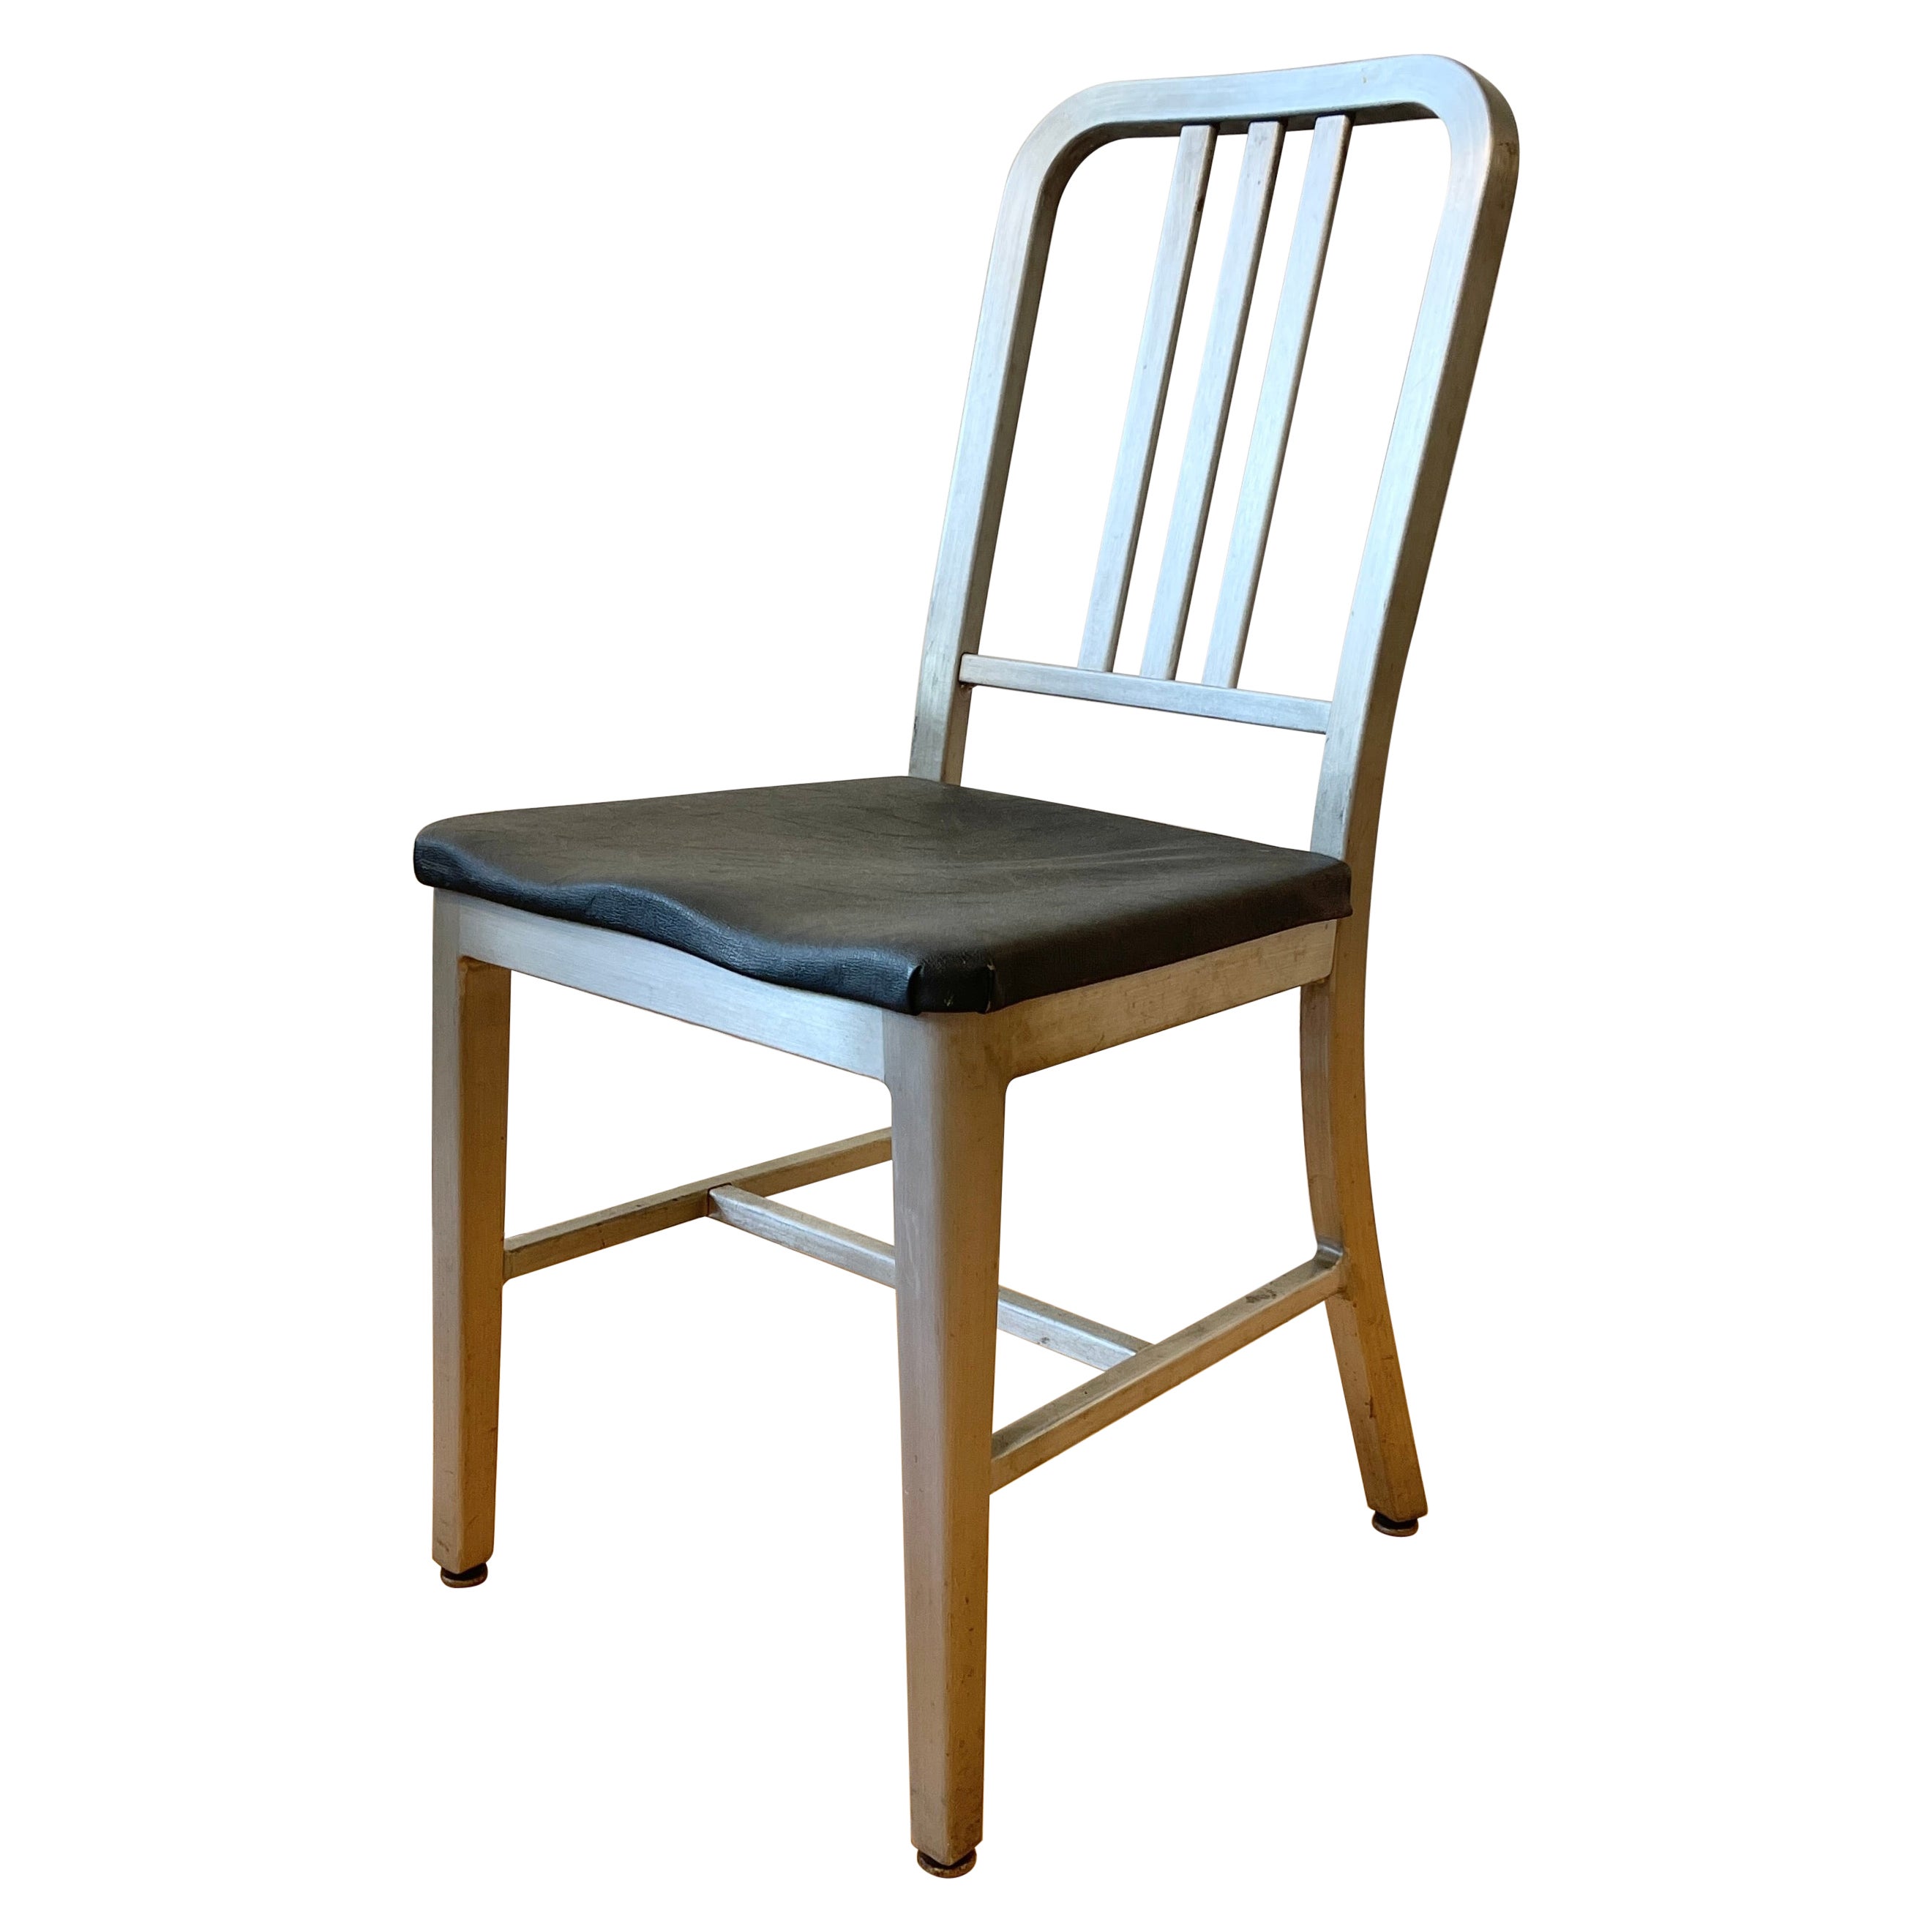 Early Original Navy Chairs by Goodform / General Fireproofing 60 Available